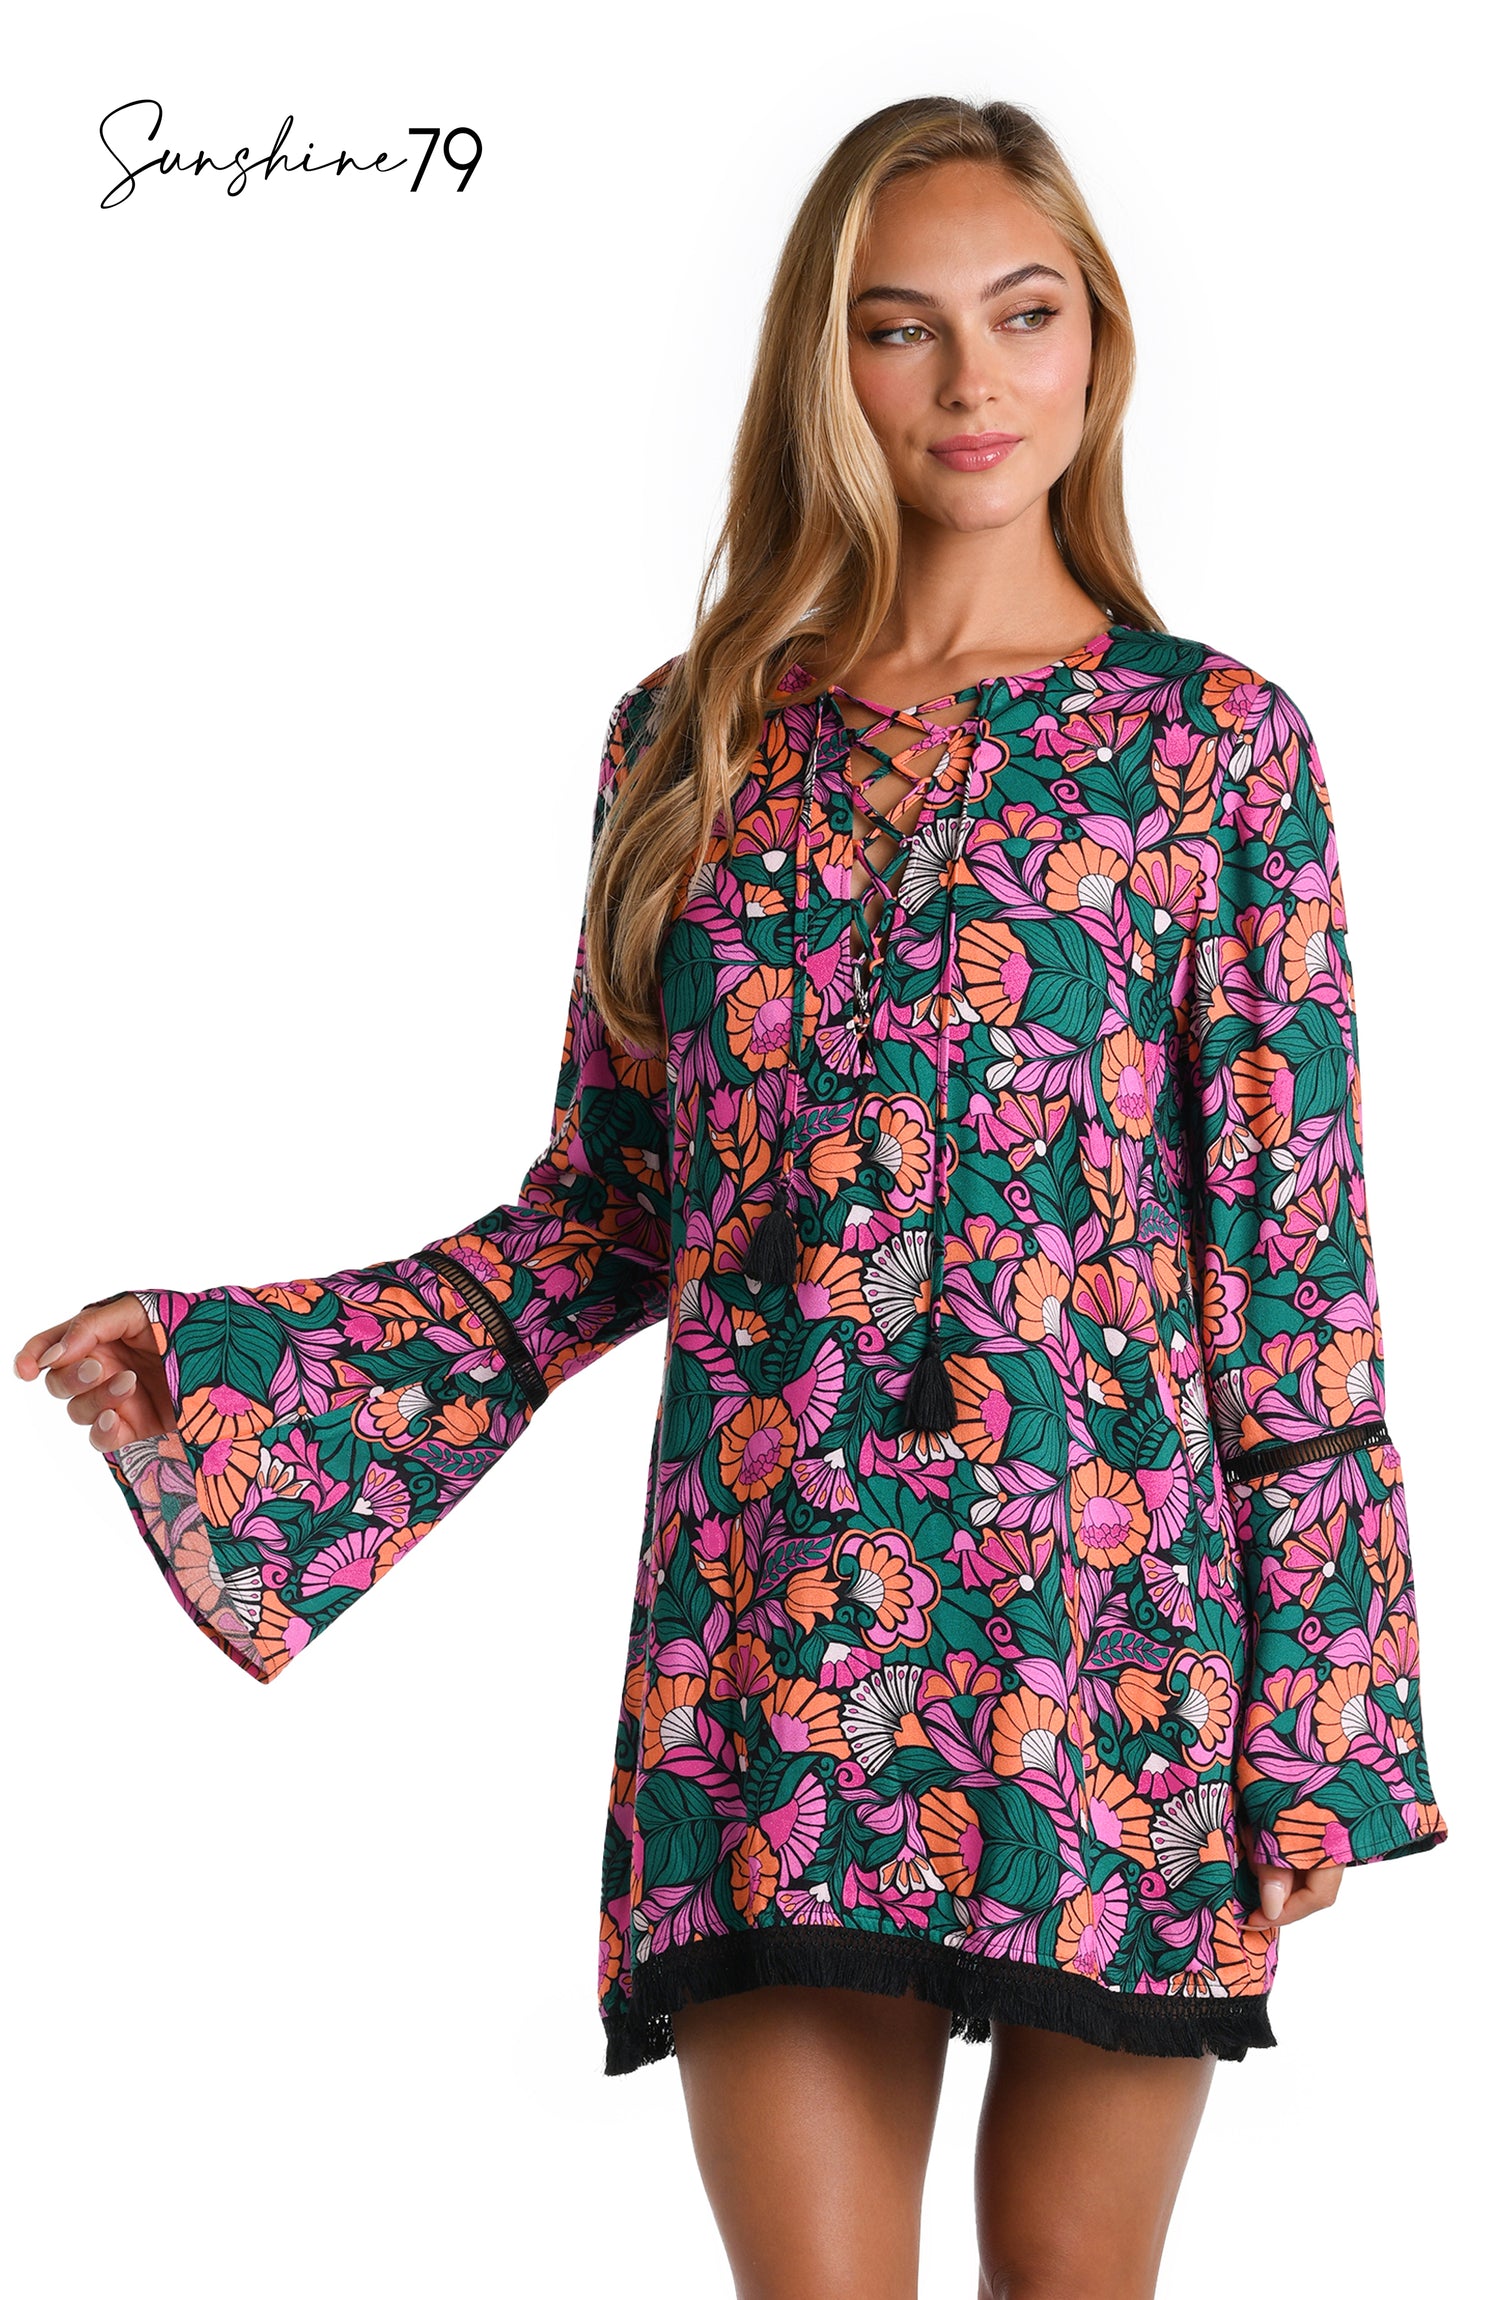 Model is wearing a multicolored Long Sleeve Tunic Cover Up Dress